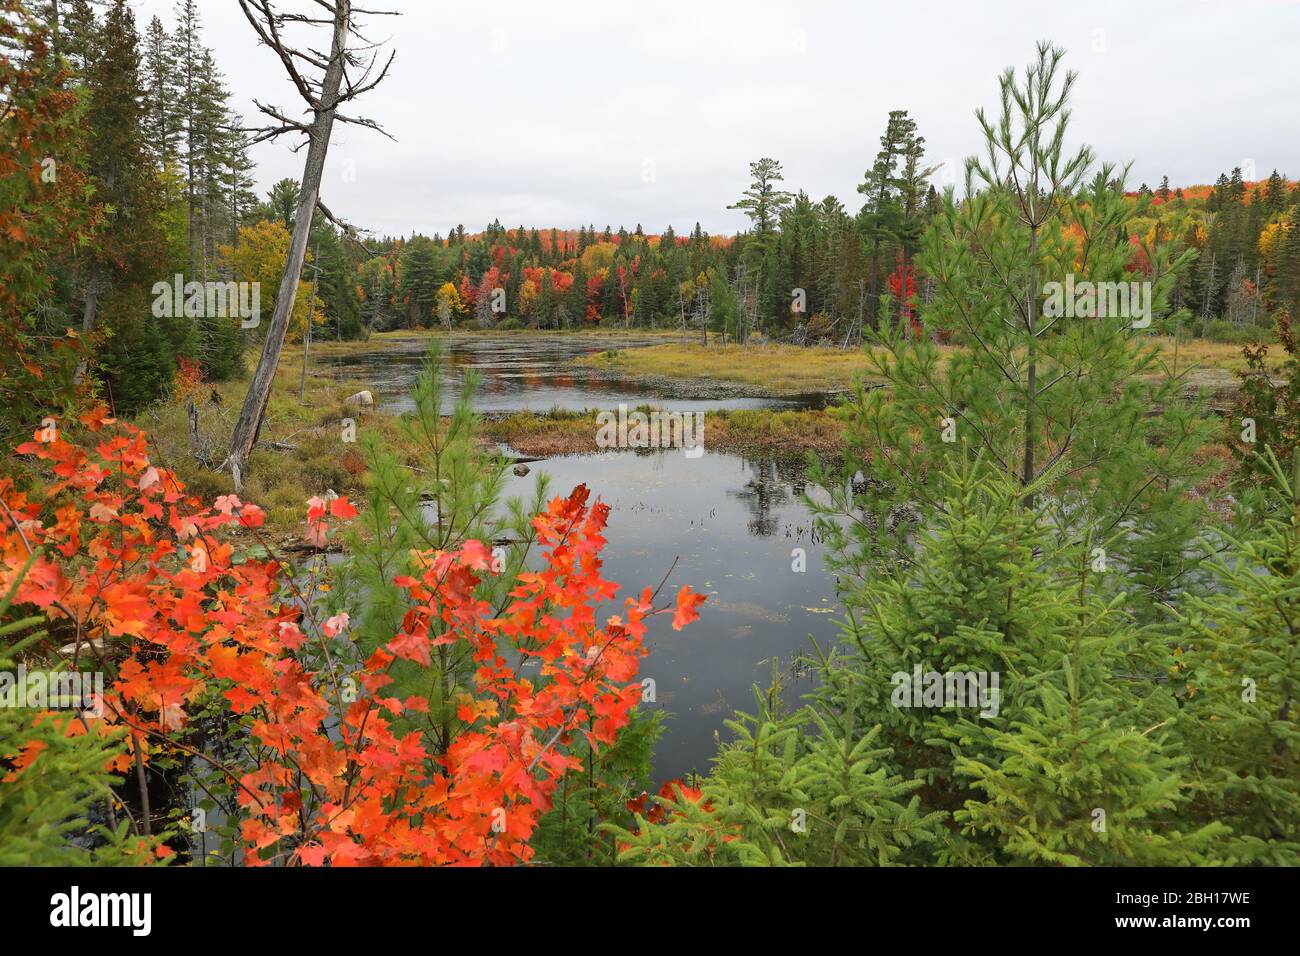 colouring of the leaves in autumn, Canada, Ontario, Algonquin Provincial Park Stock Photo